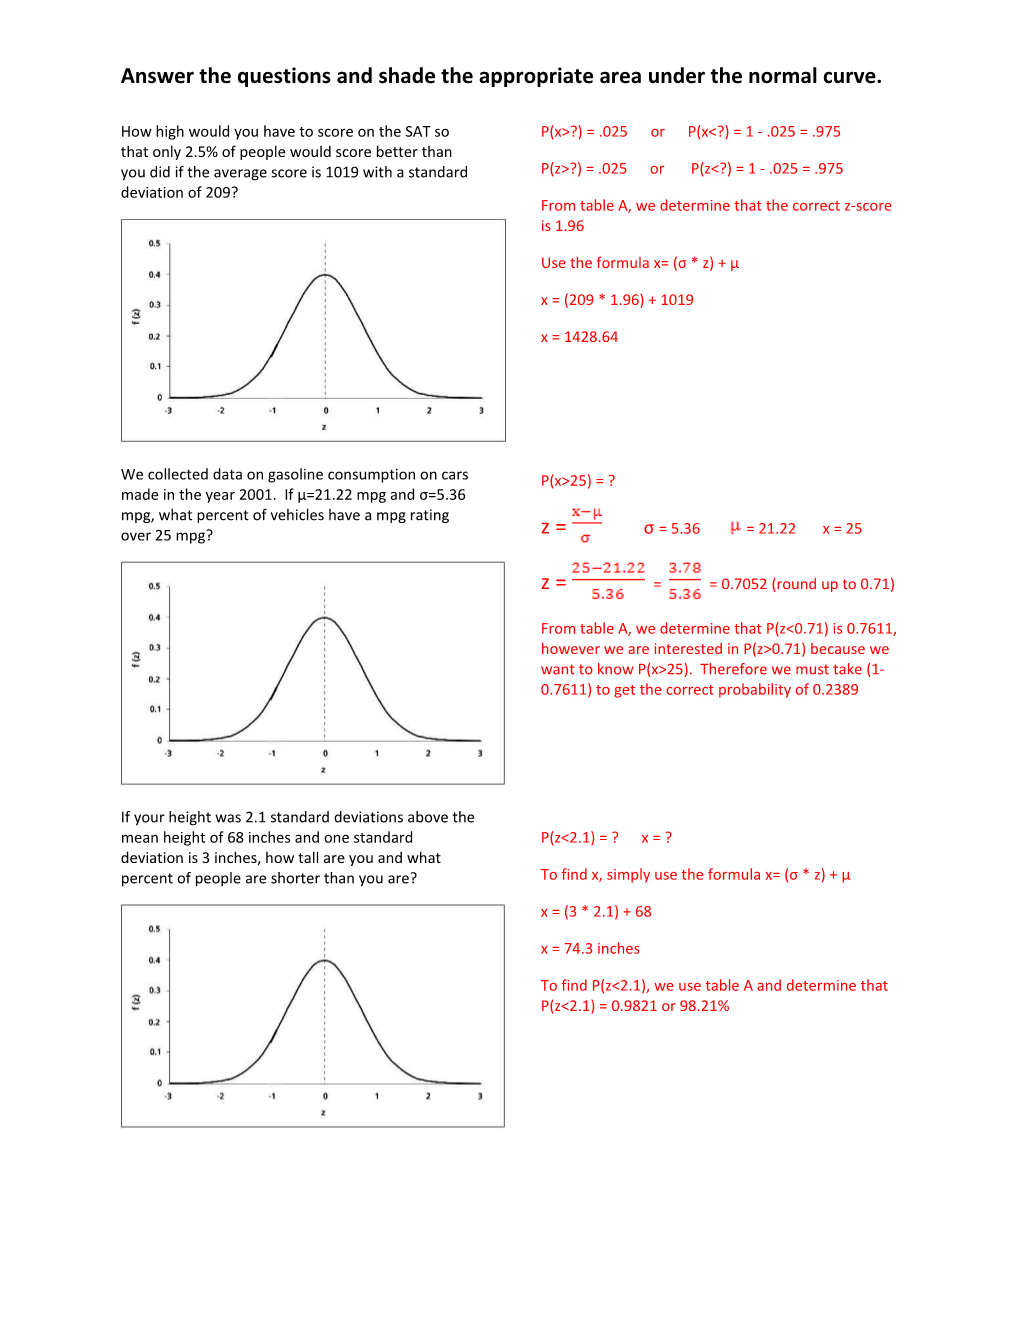 Answer the Questions and Shade the Appropriate Area Under the Normal Curve